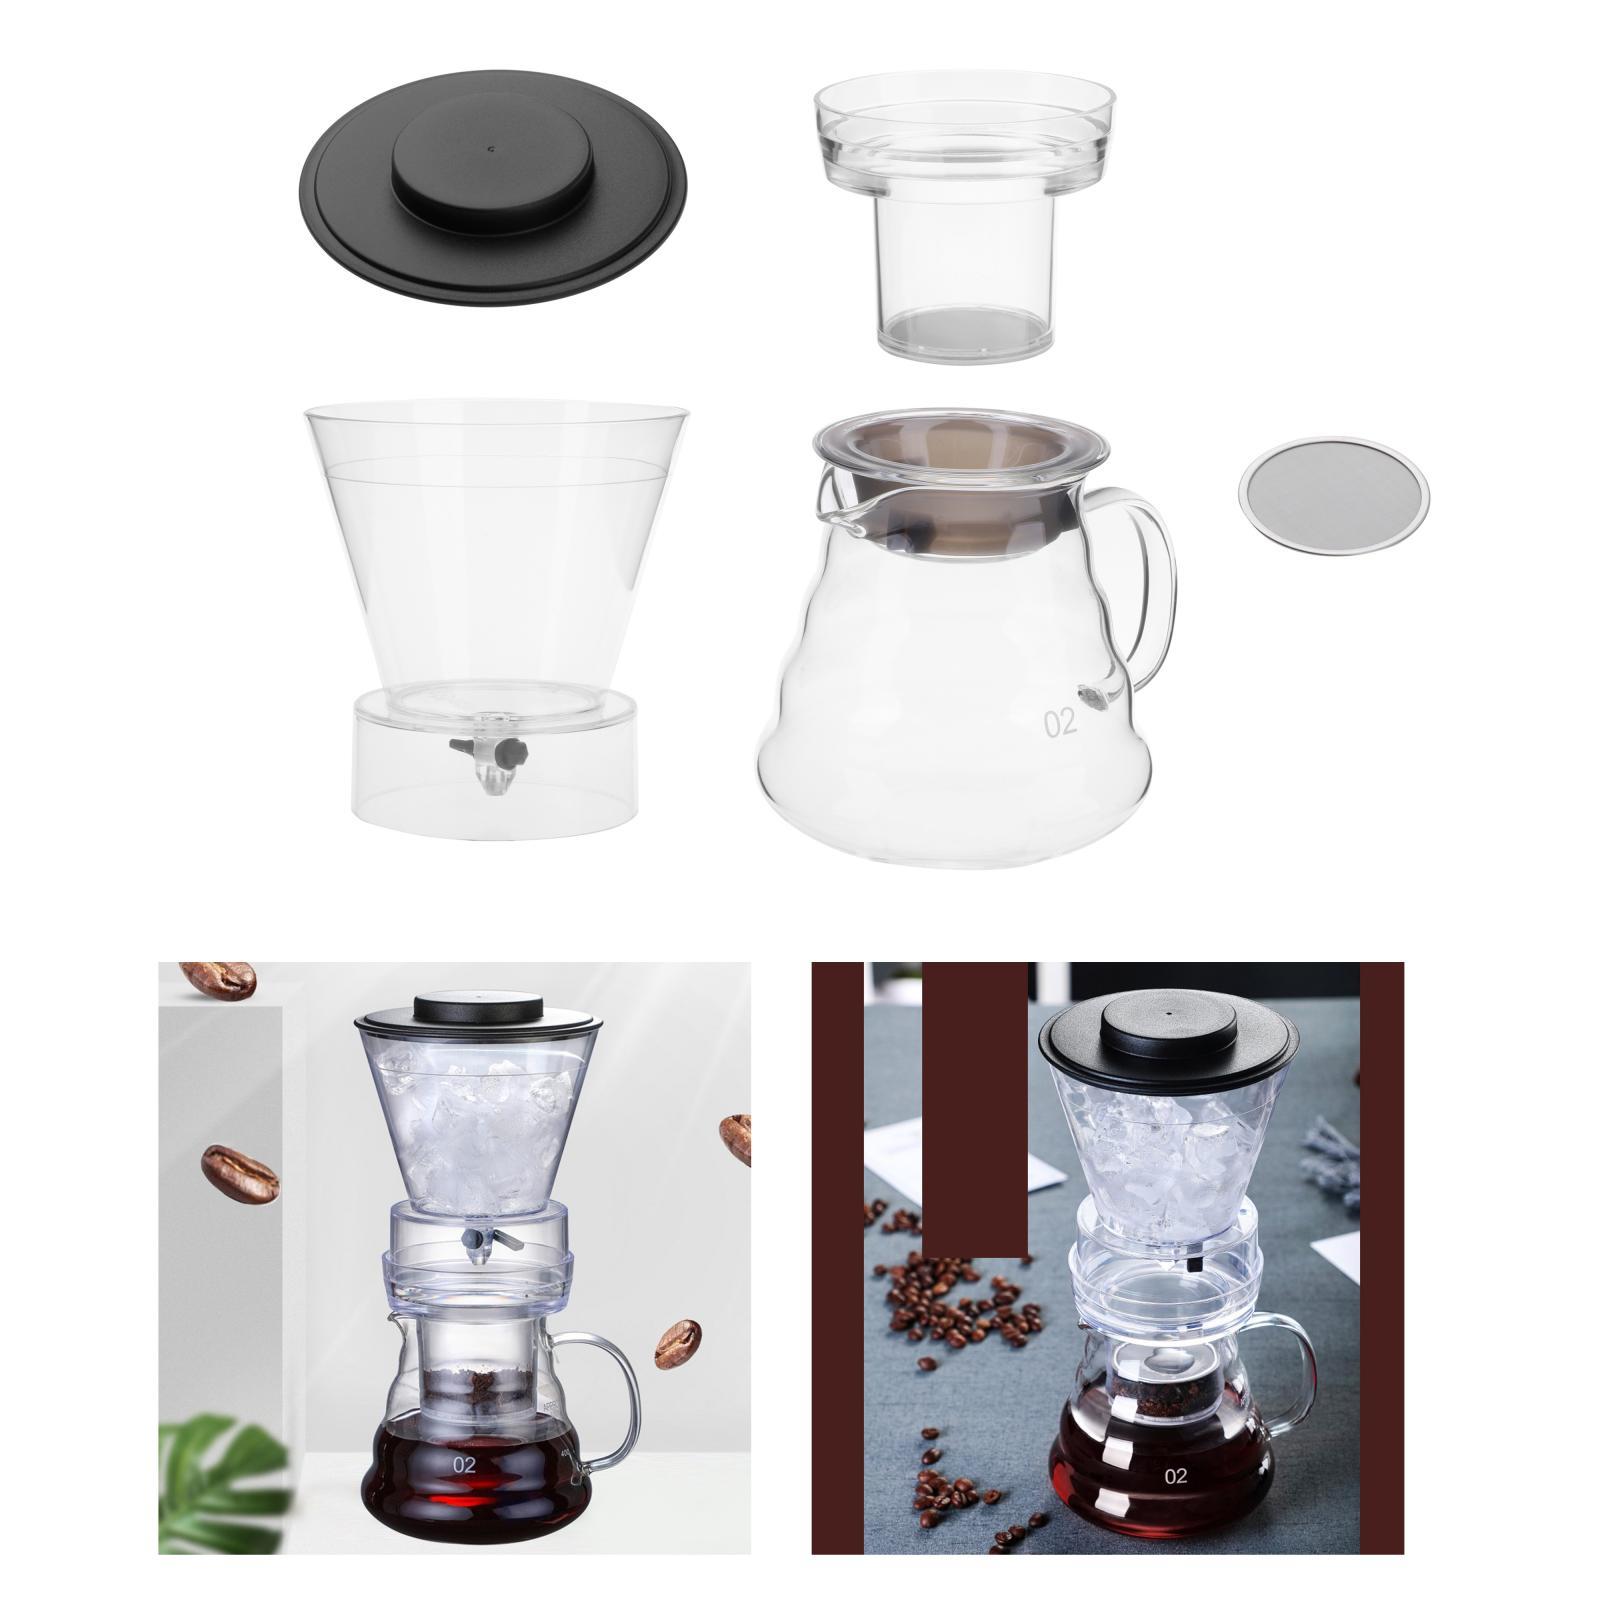 Ice Drip Coffee Dripper Pot w/ Filter & Handle Coffee Kettle Home